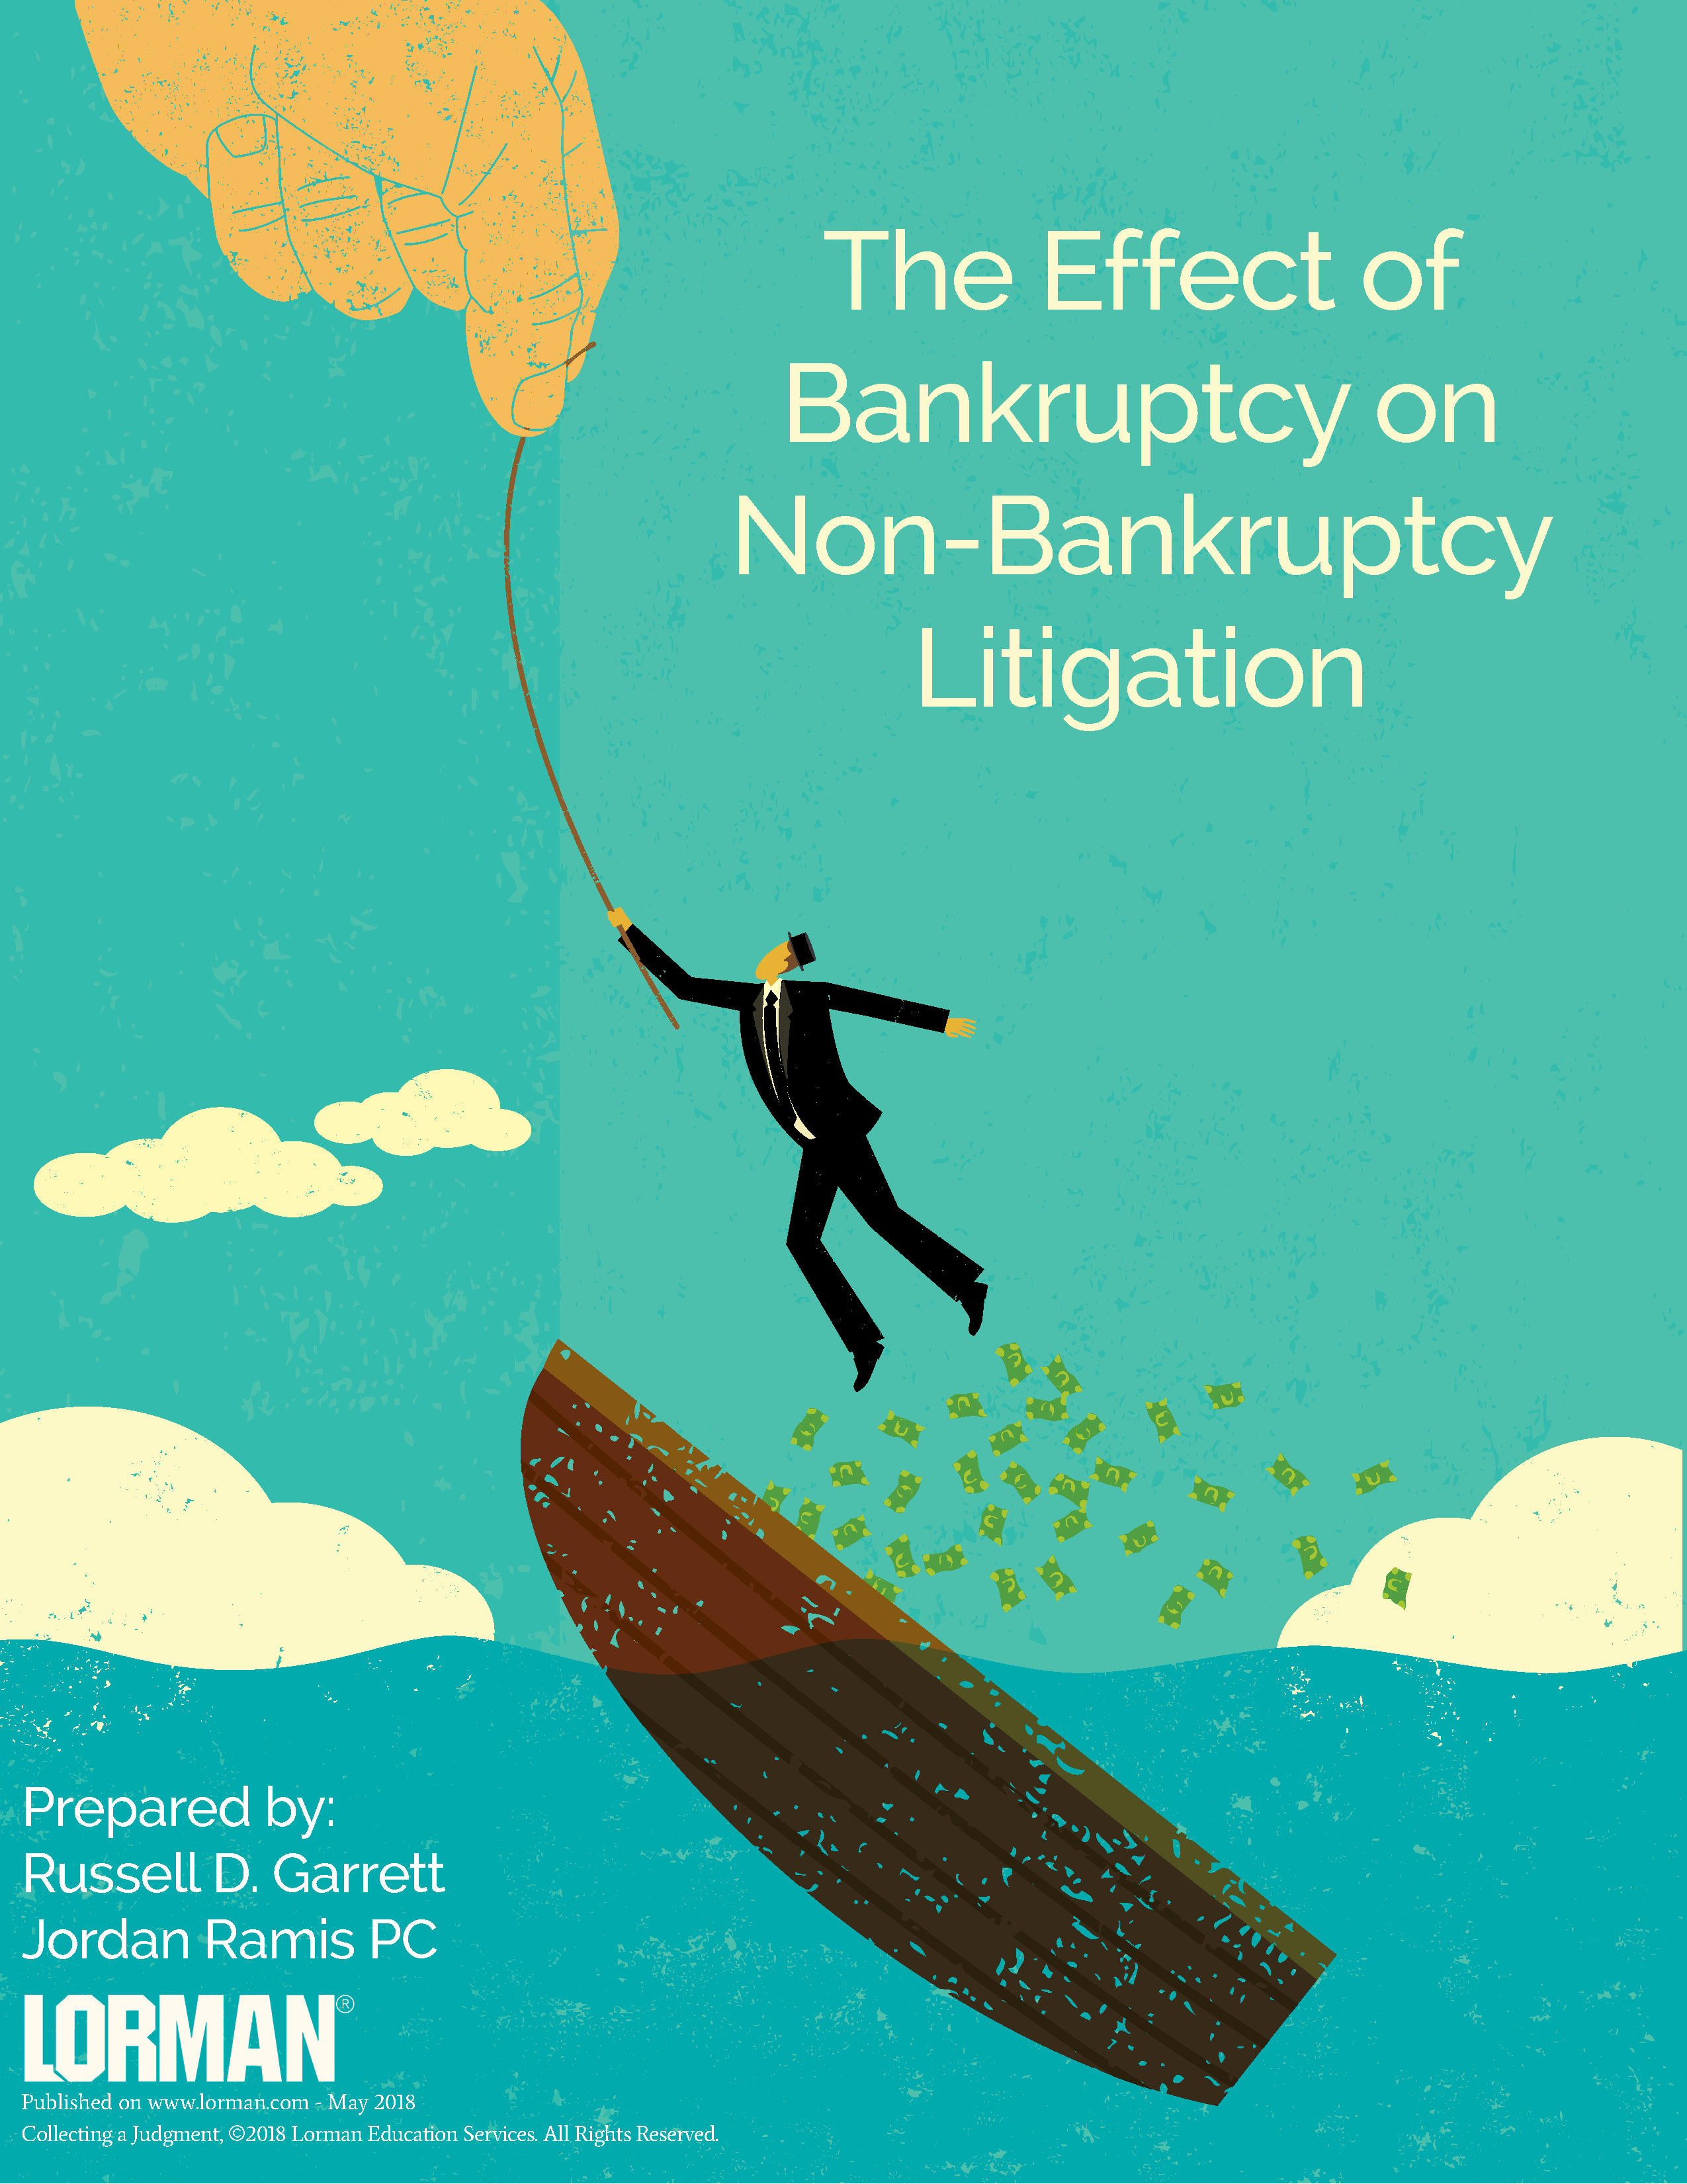 The Effect of Bankruptcy on Non-Bankruptcy Litigation